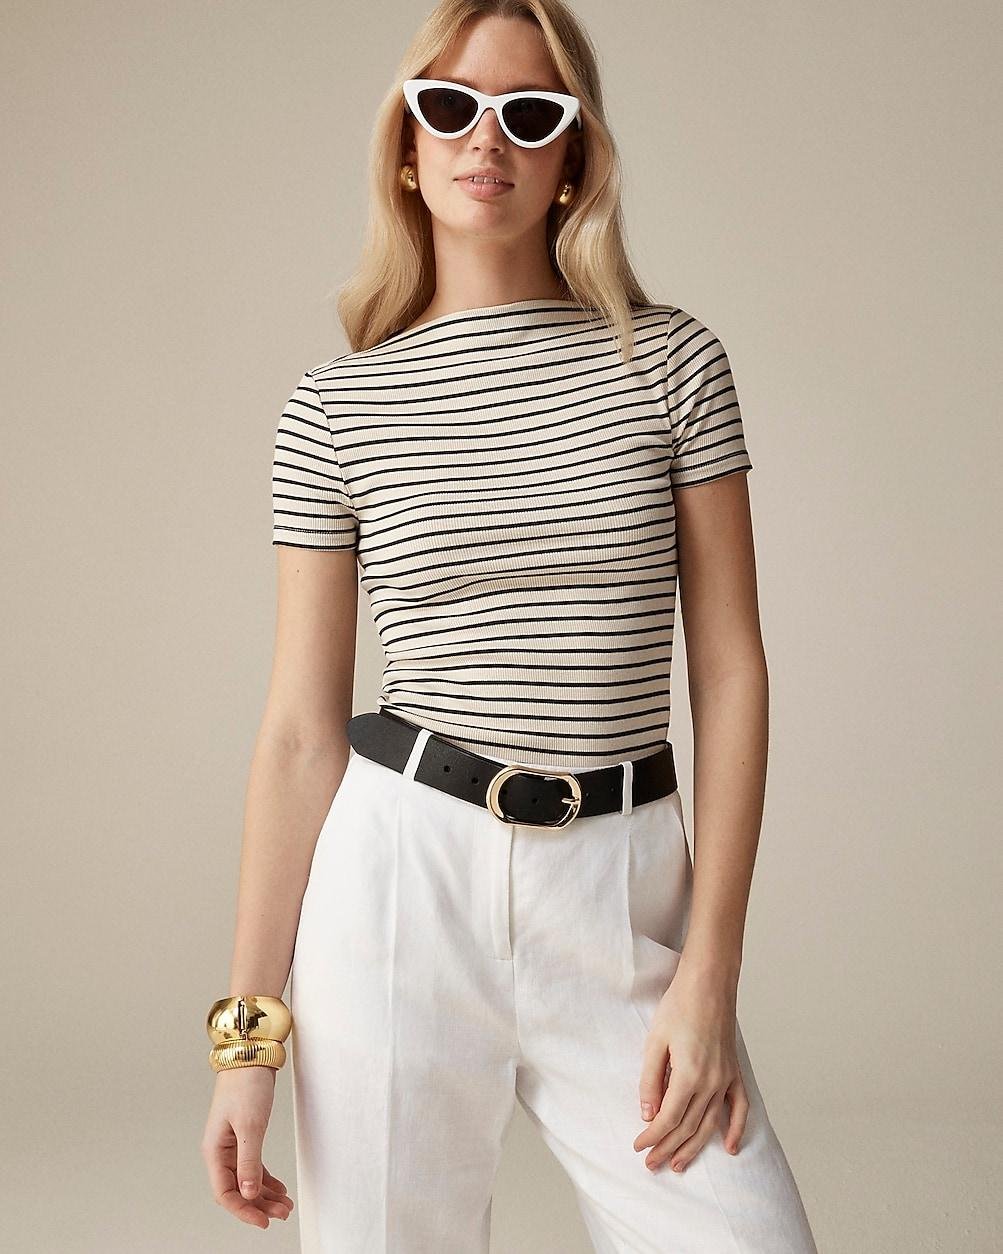 Fine-rib fitted boatneck T-shirt in stripe by J.CREW